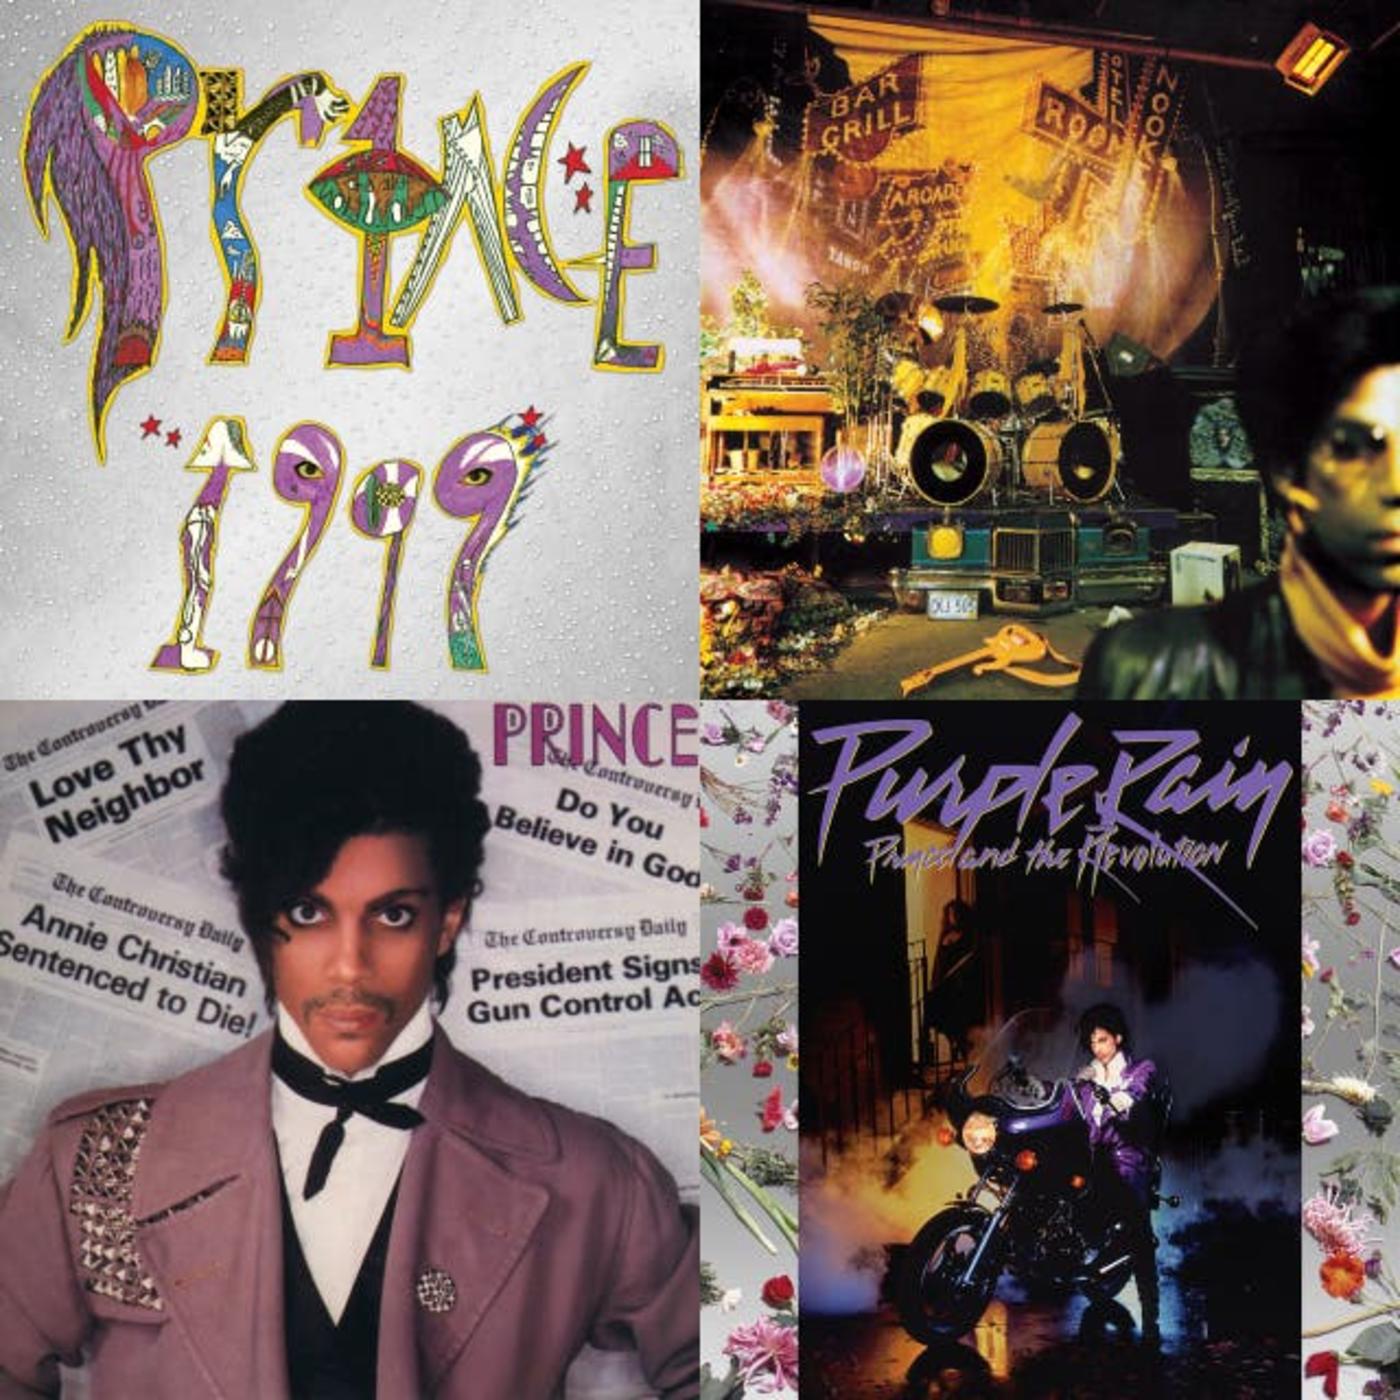 Prince - New Year's Eve in September